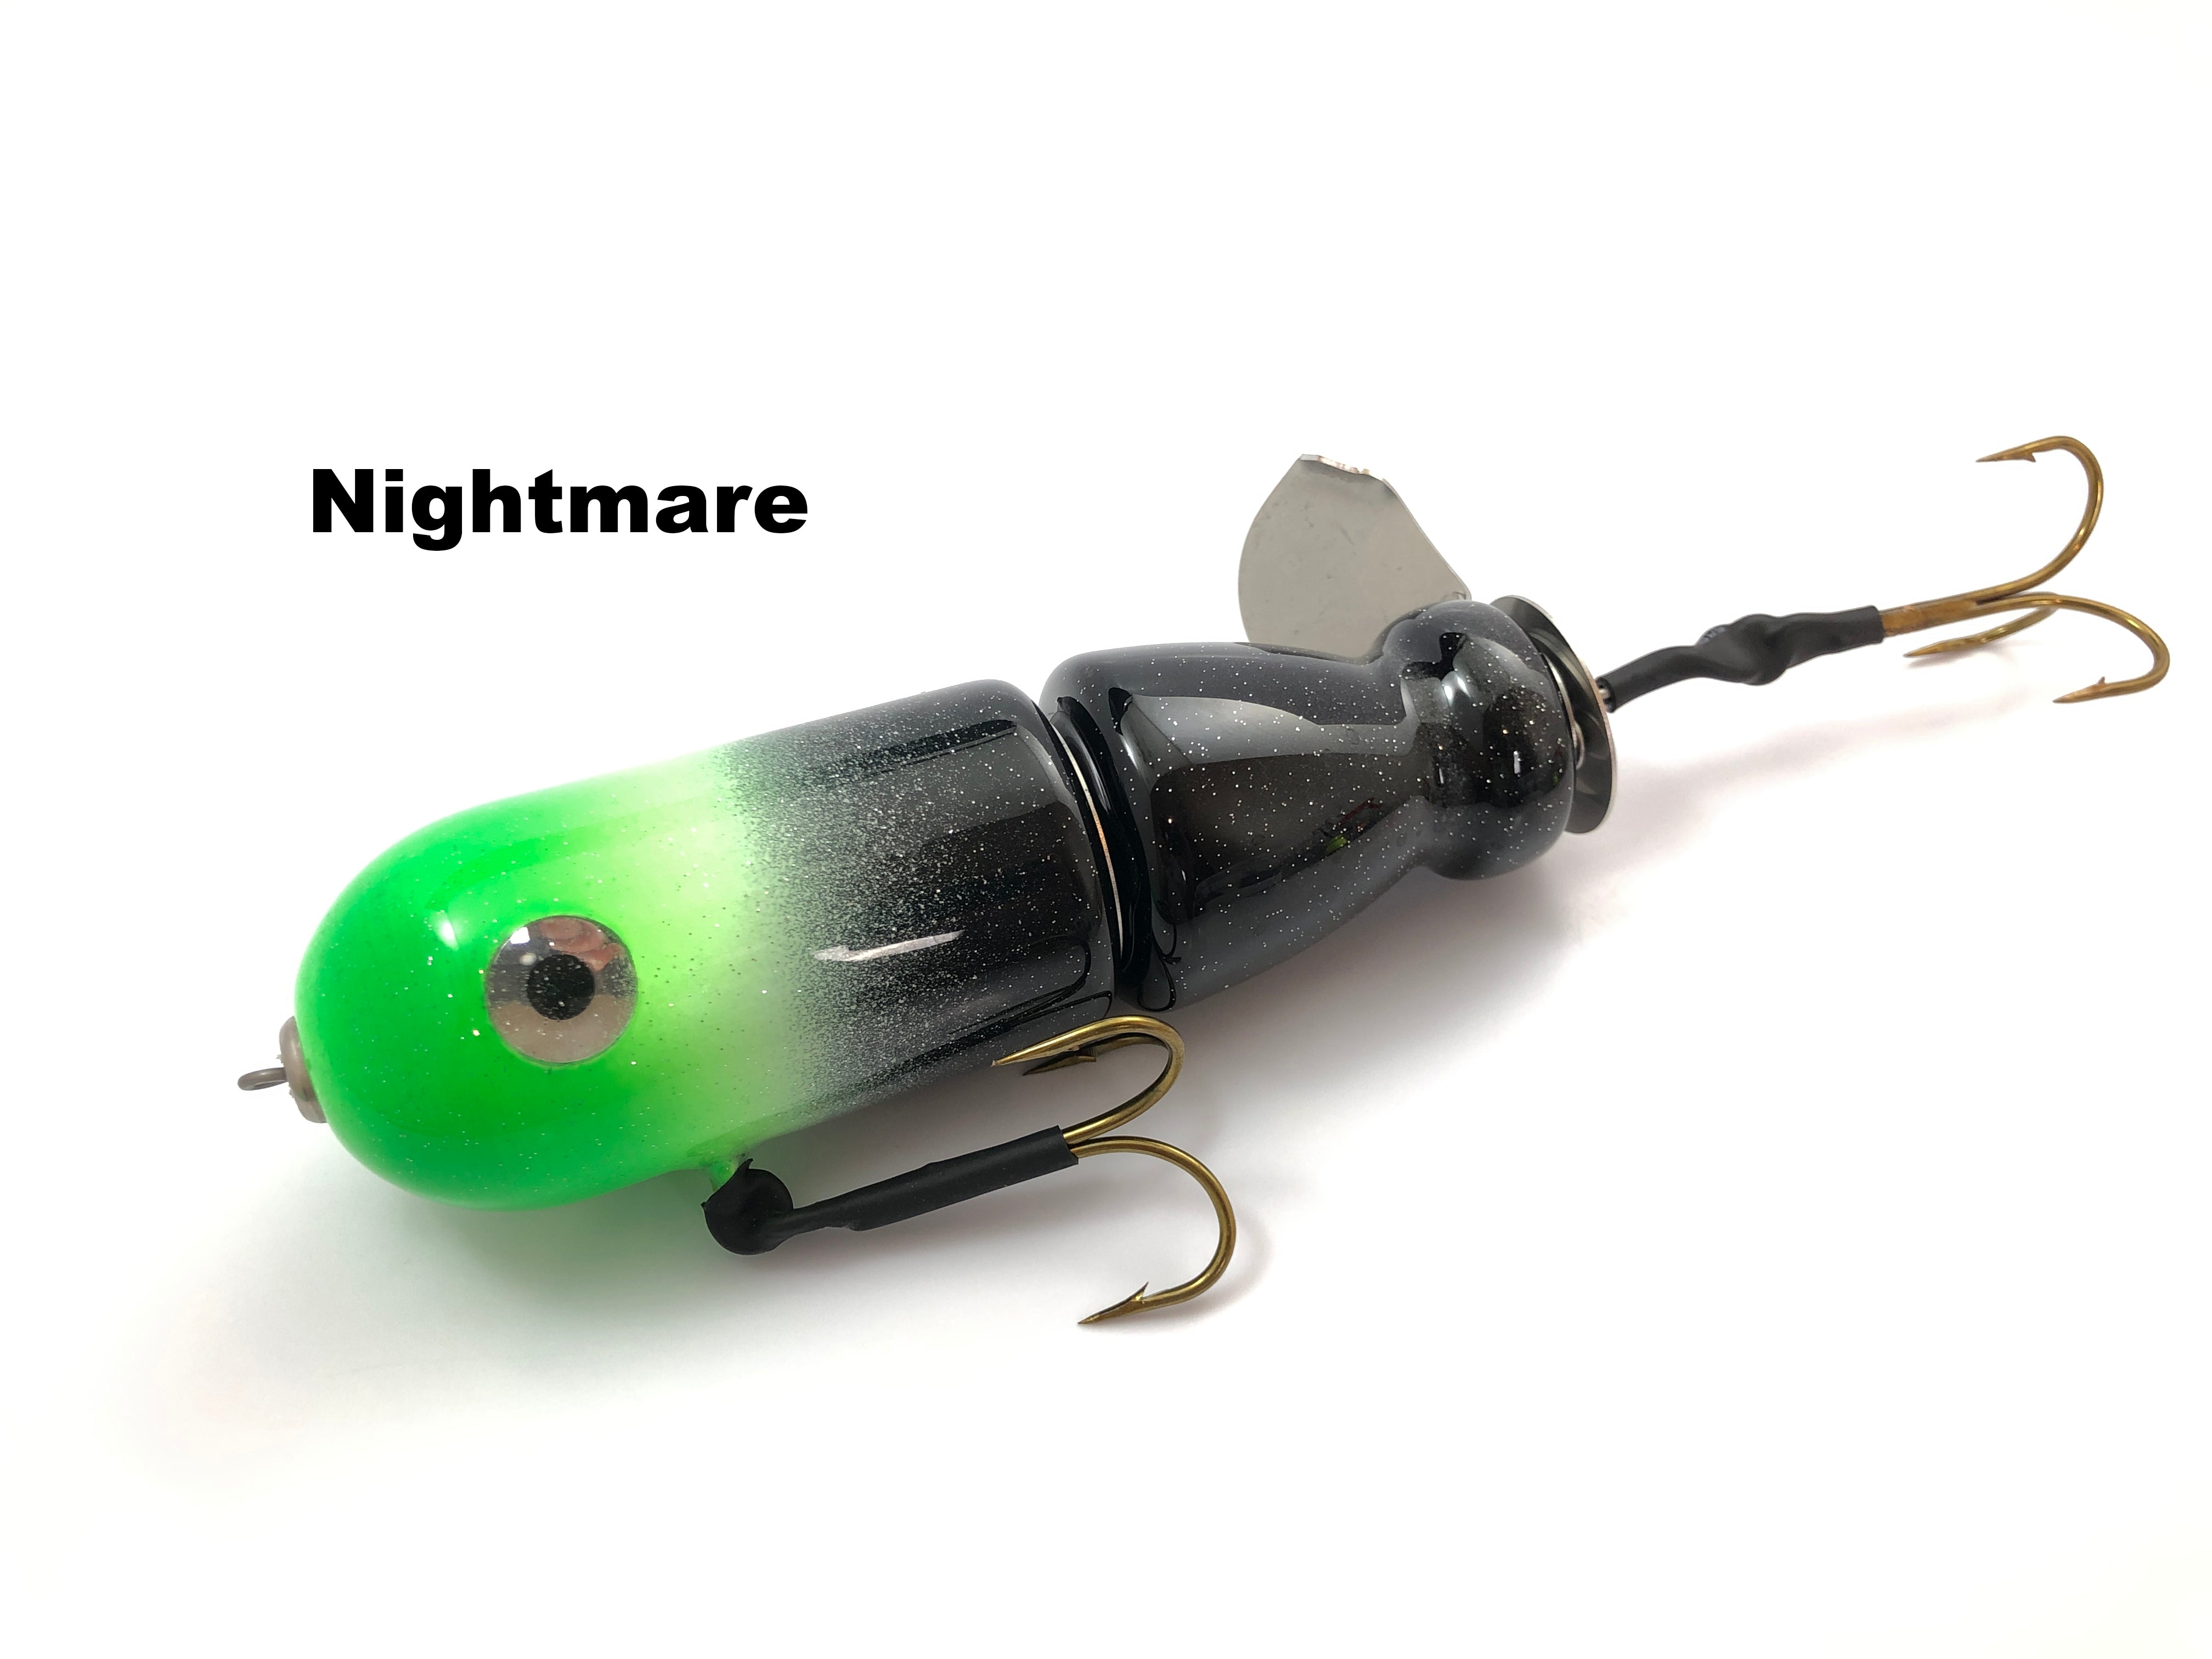 Top Water Baits – tagged Tomahawk Topwater Musky Lure – Team